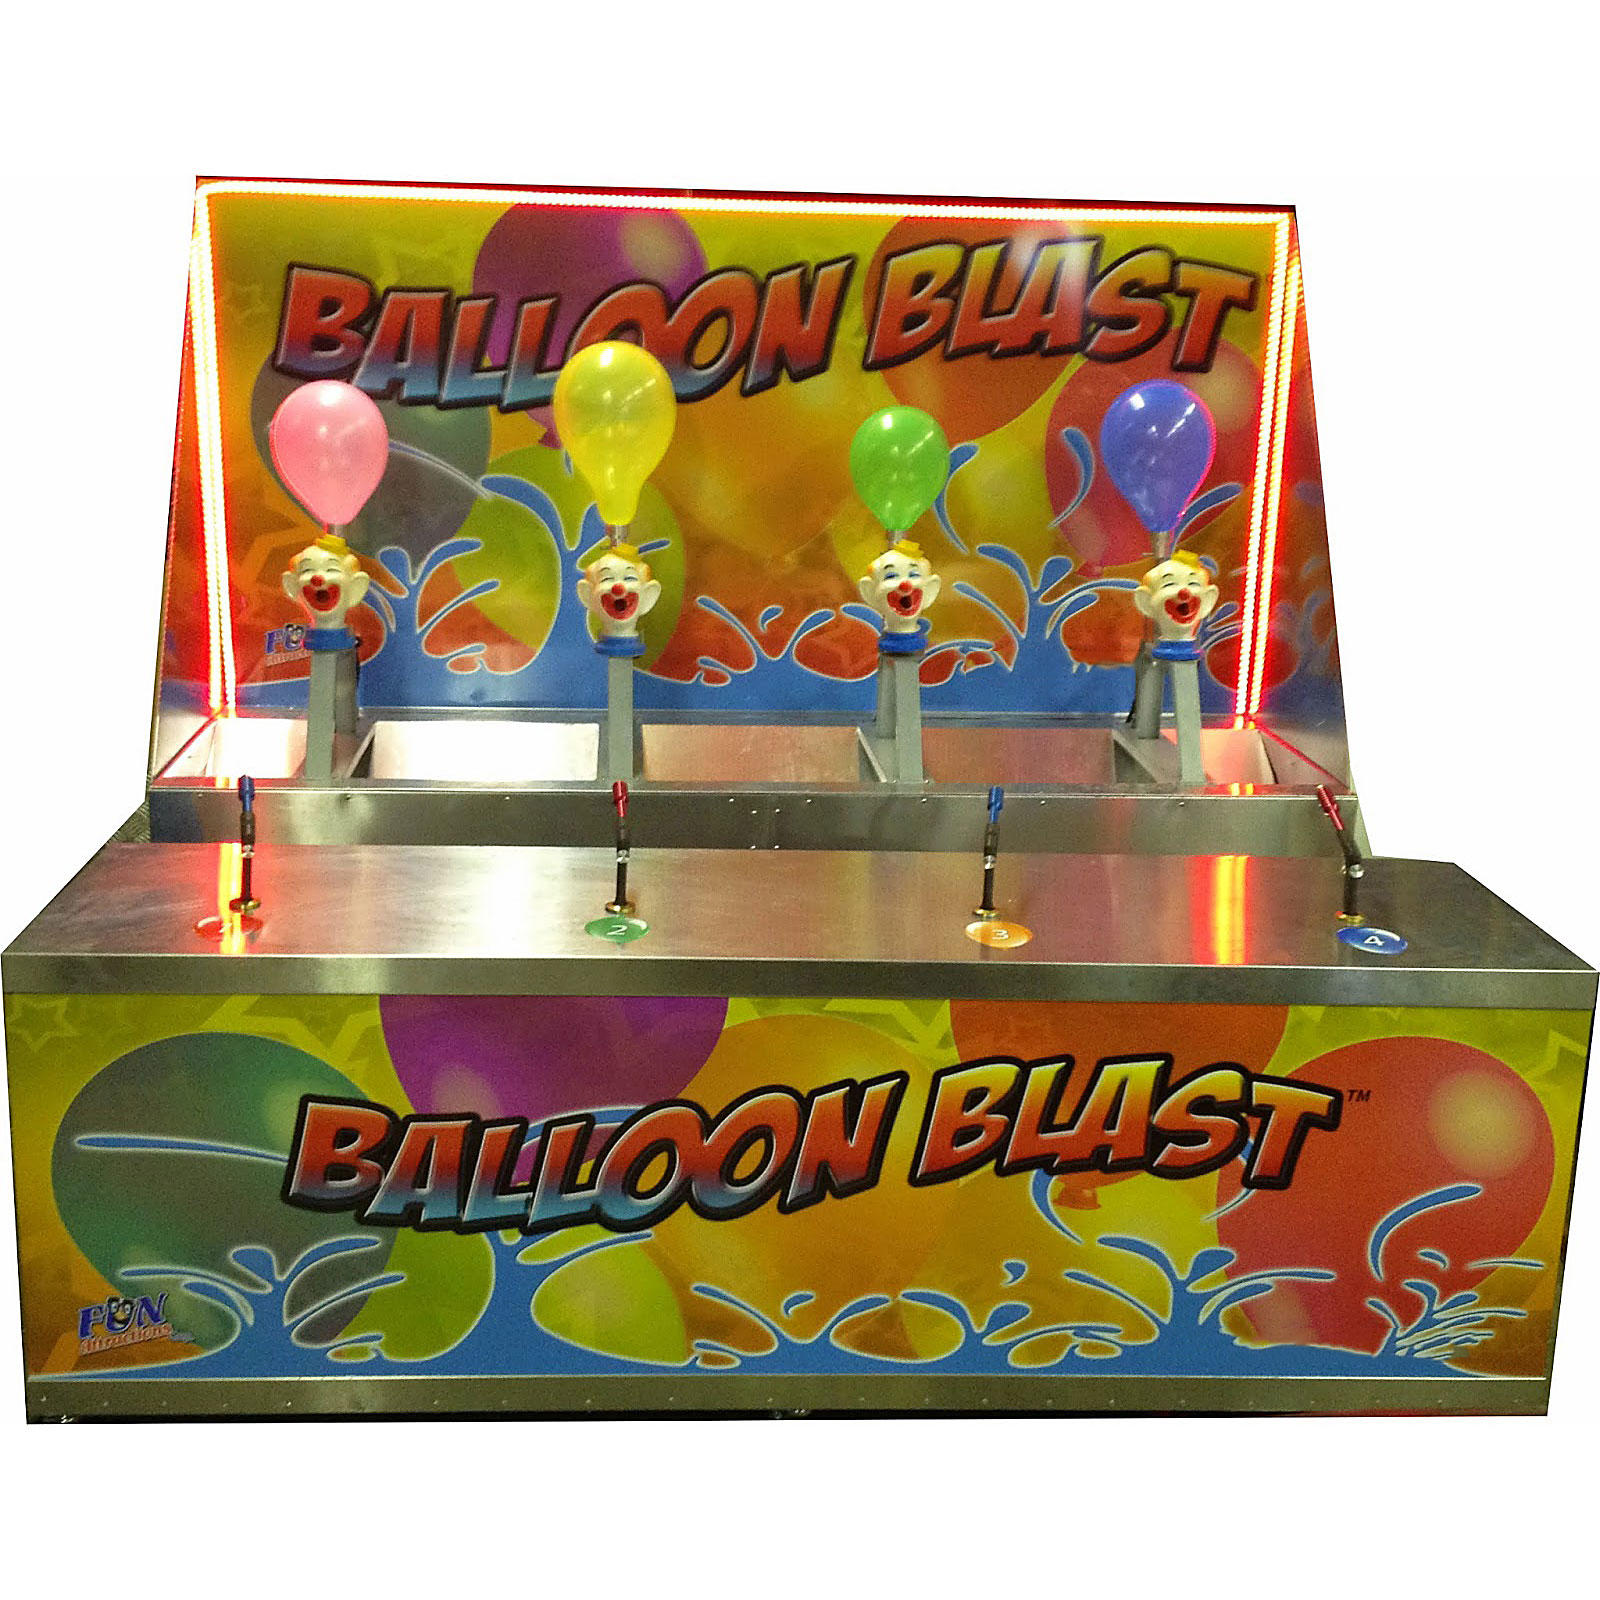 Carnival classic party rental .....Jump And Slide has your favorite carnival game.Water gun race by shooting water into the clowns mouth.1-4 players race to fill up the balloon with water.First person to make the bell go off is the winner.
Jump And Slide has all your party rentals found in one place